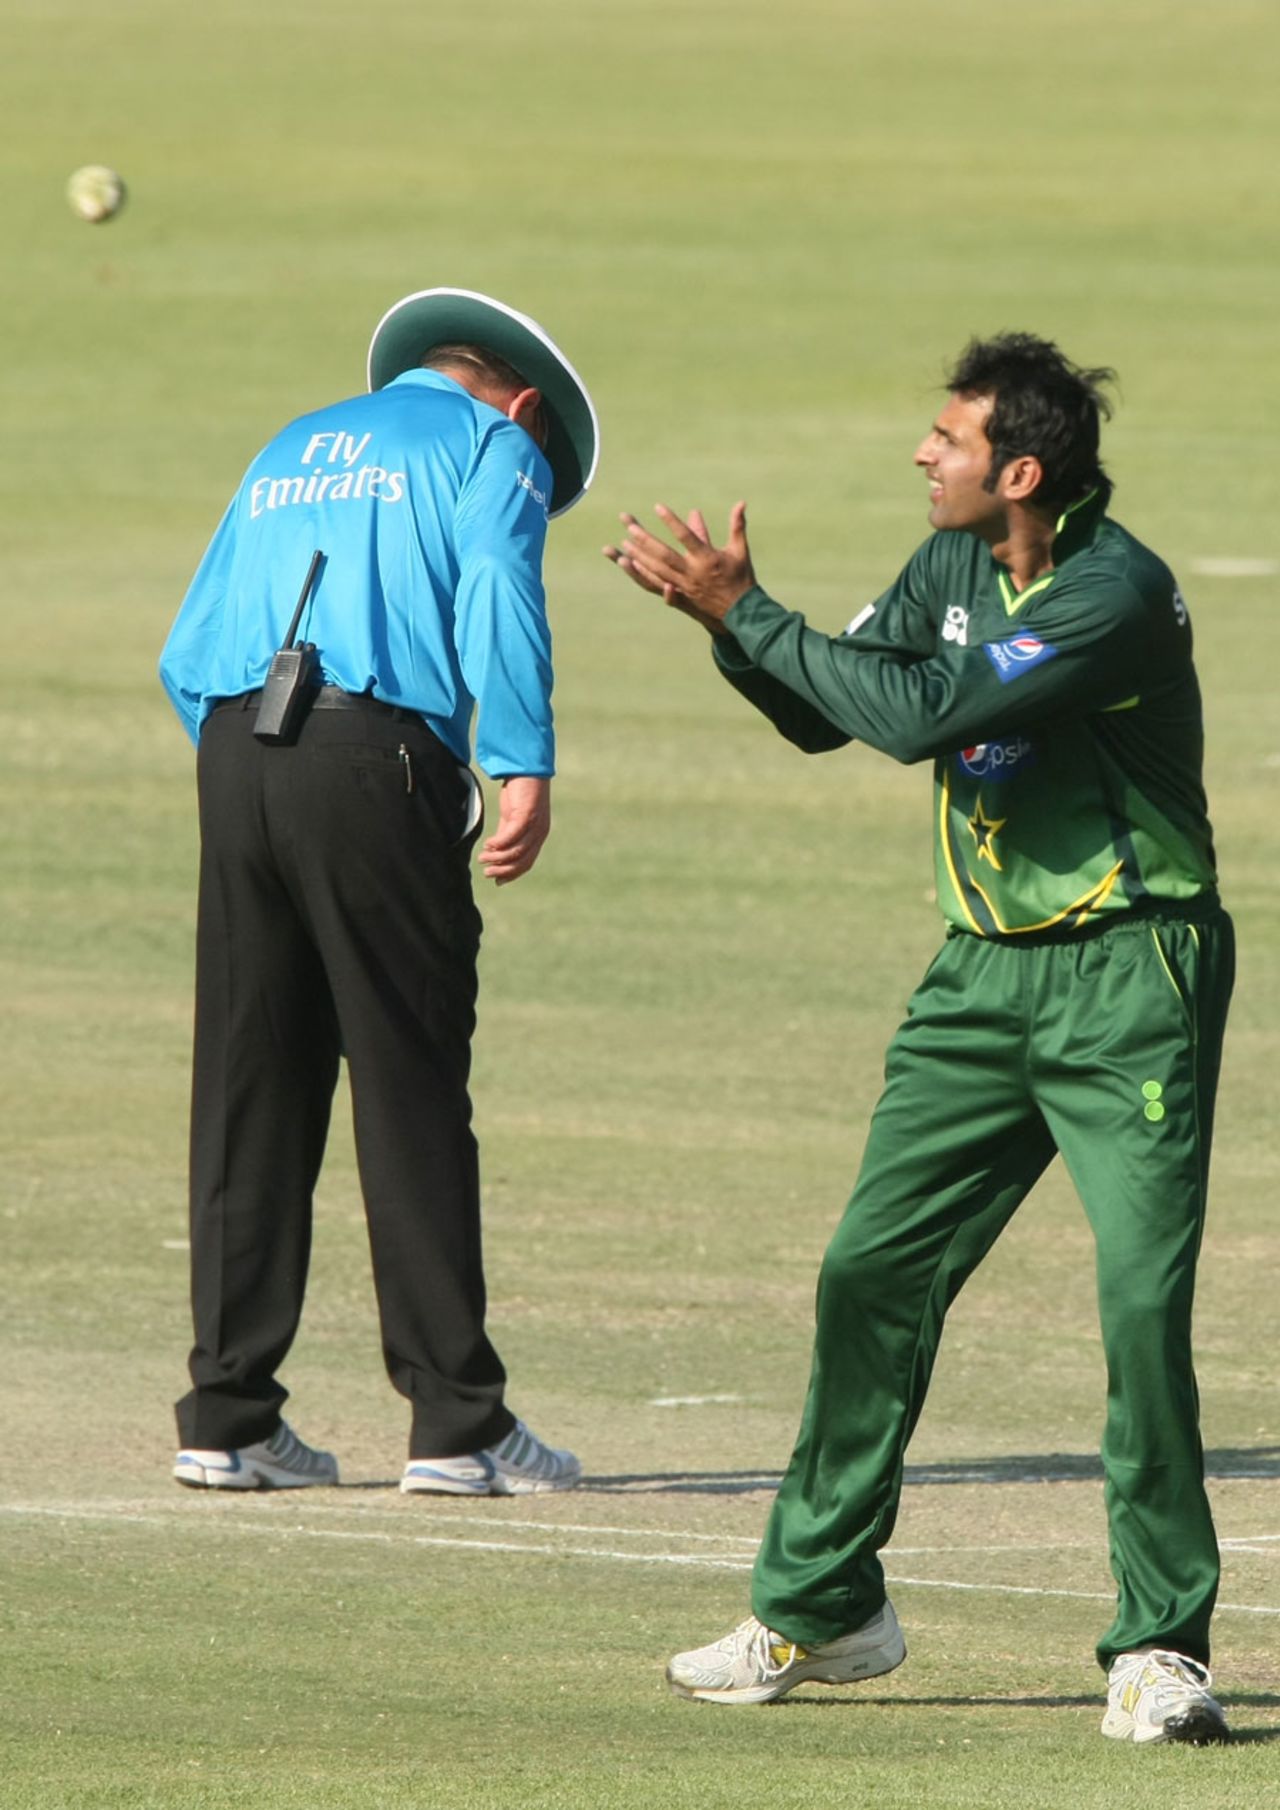 Shoaib Malik collects the ball in his first match since being cleared by the PCB's integrity committee, Zimbabwe v Pakistan, 1st ODI, Bulawayo, September 8, 2011